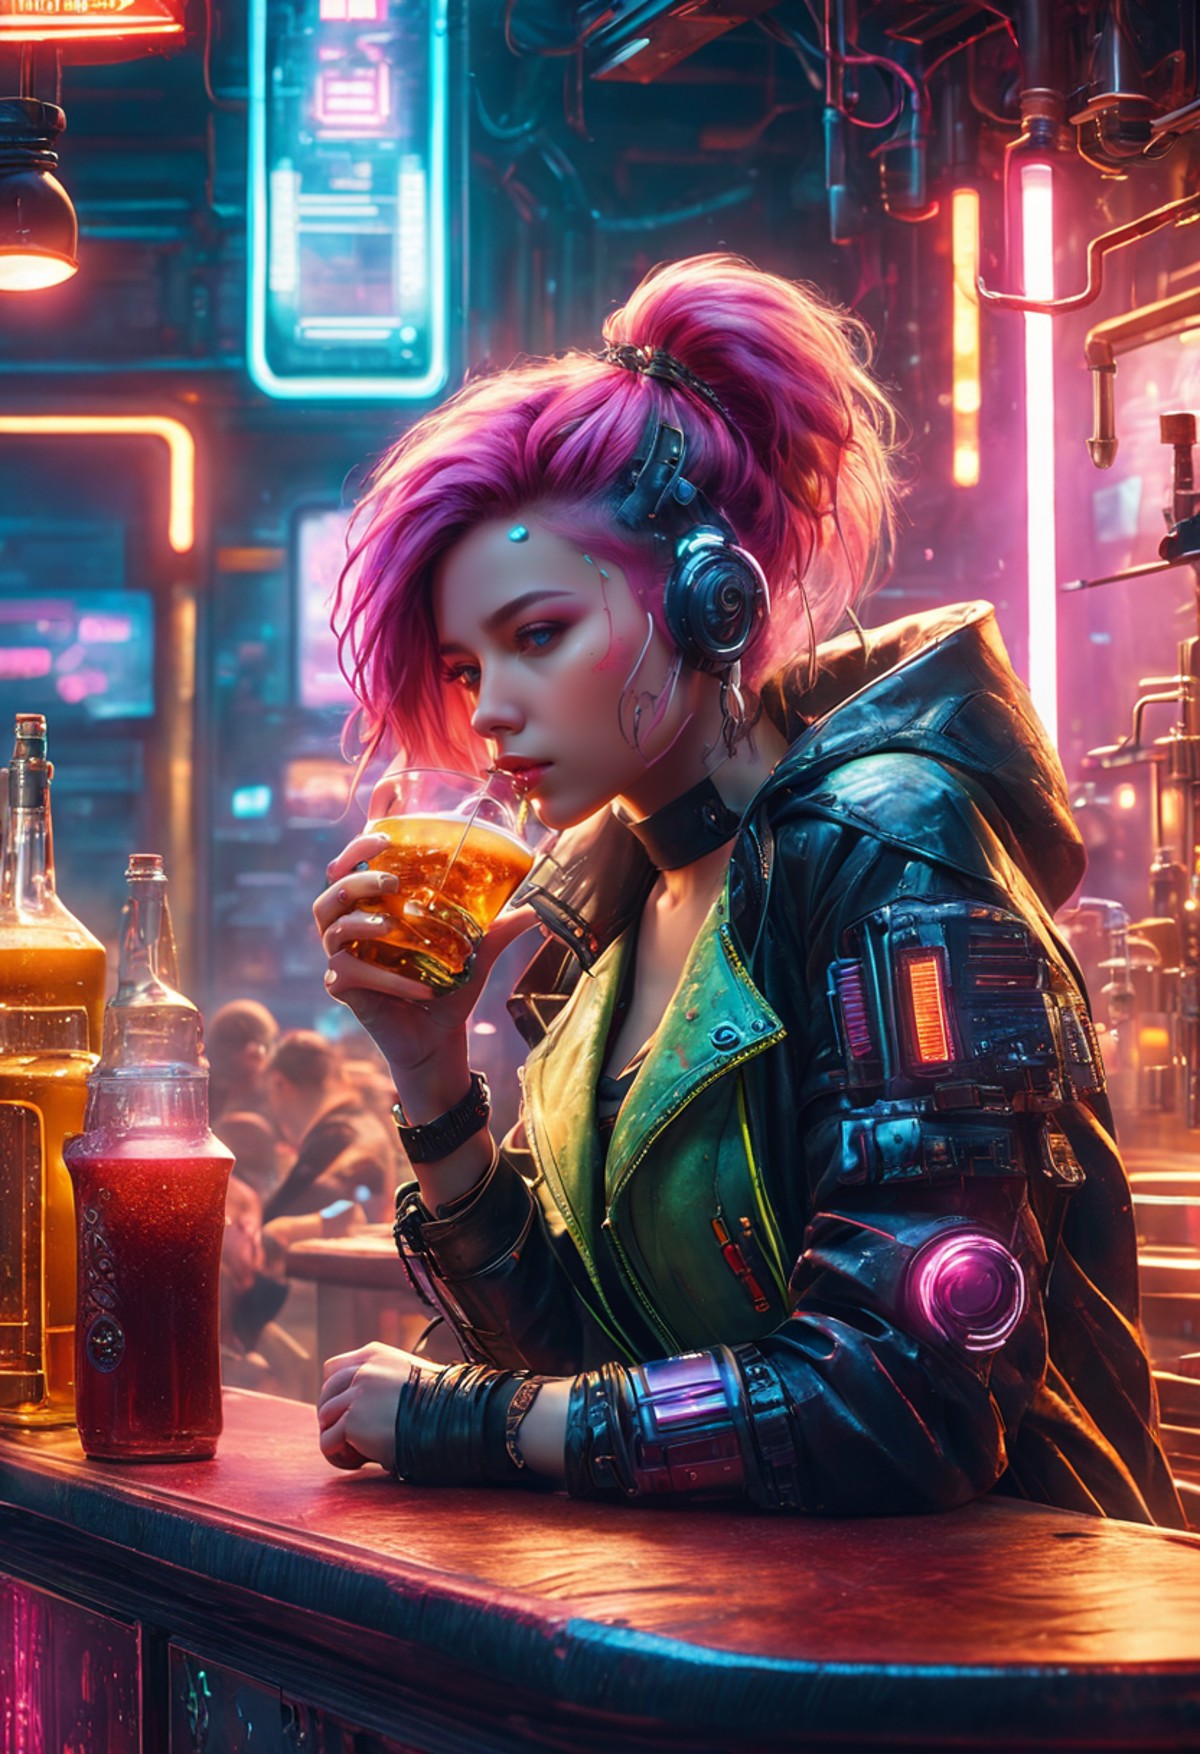 Photorealism redshift style analog style  photograph close up; girl cyberpunk in a seedy bar drinking. Science fiction set...